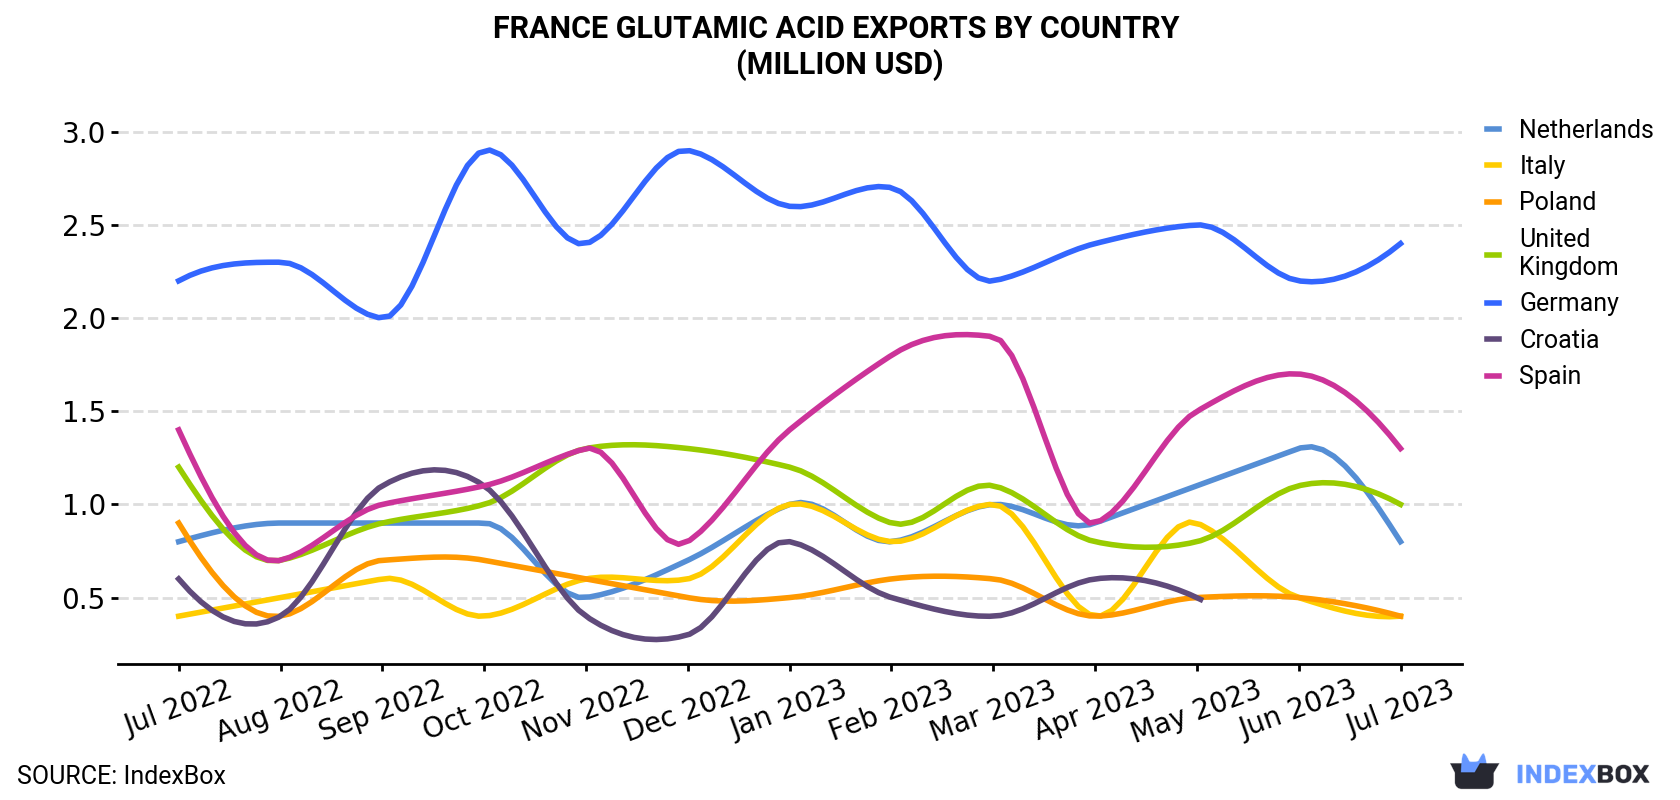 France Glutamic Acid Exports By Country (Million USD)